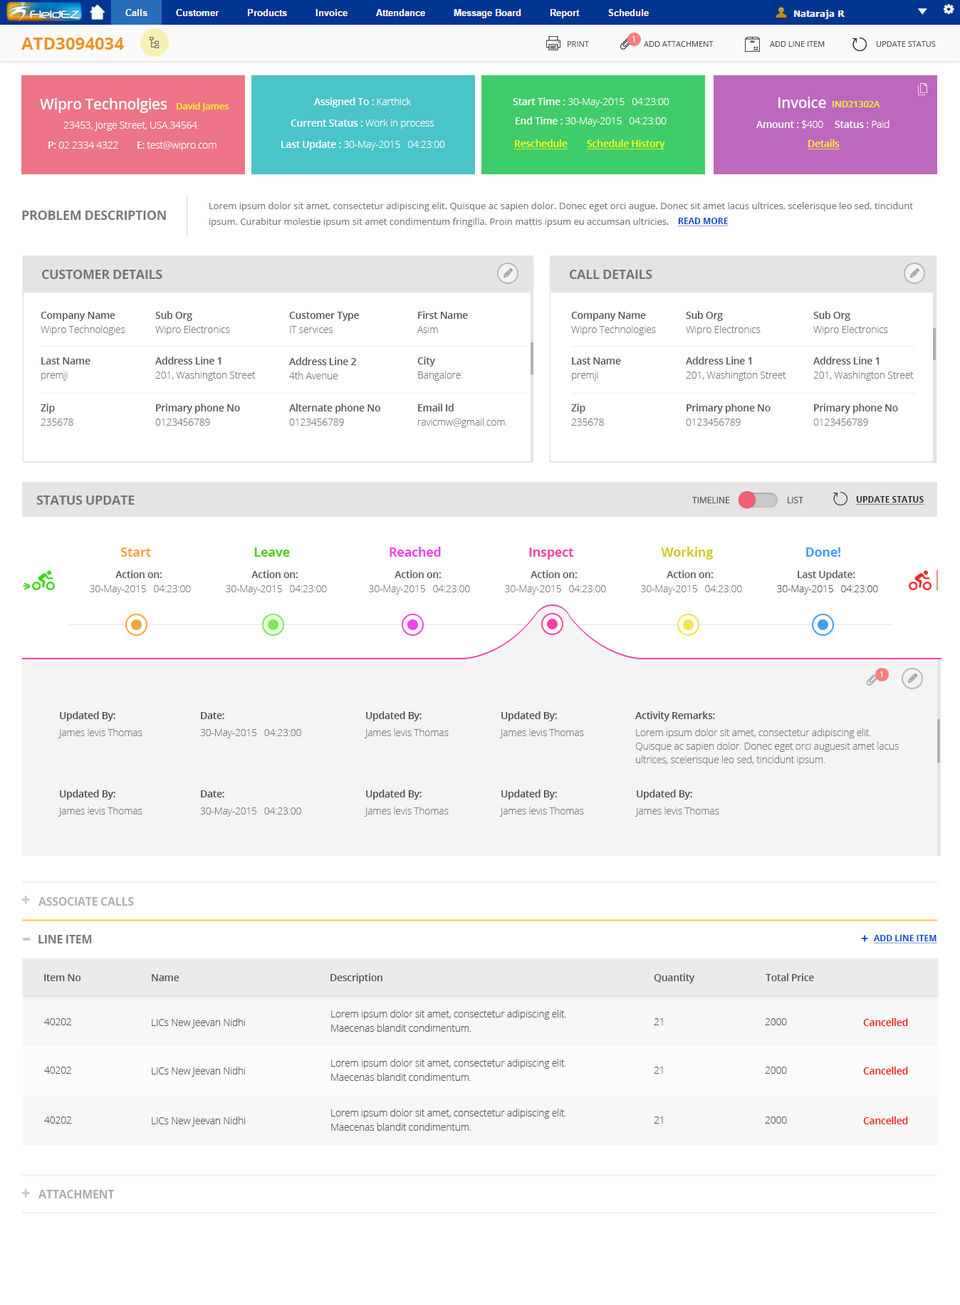 FieldEZ screenshot: Comprehensive Ticket Details: Including history, location, parts used, invoices and more